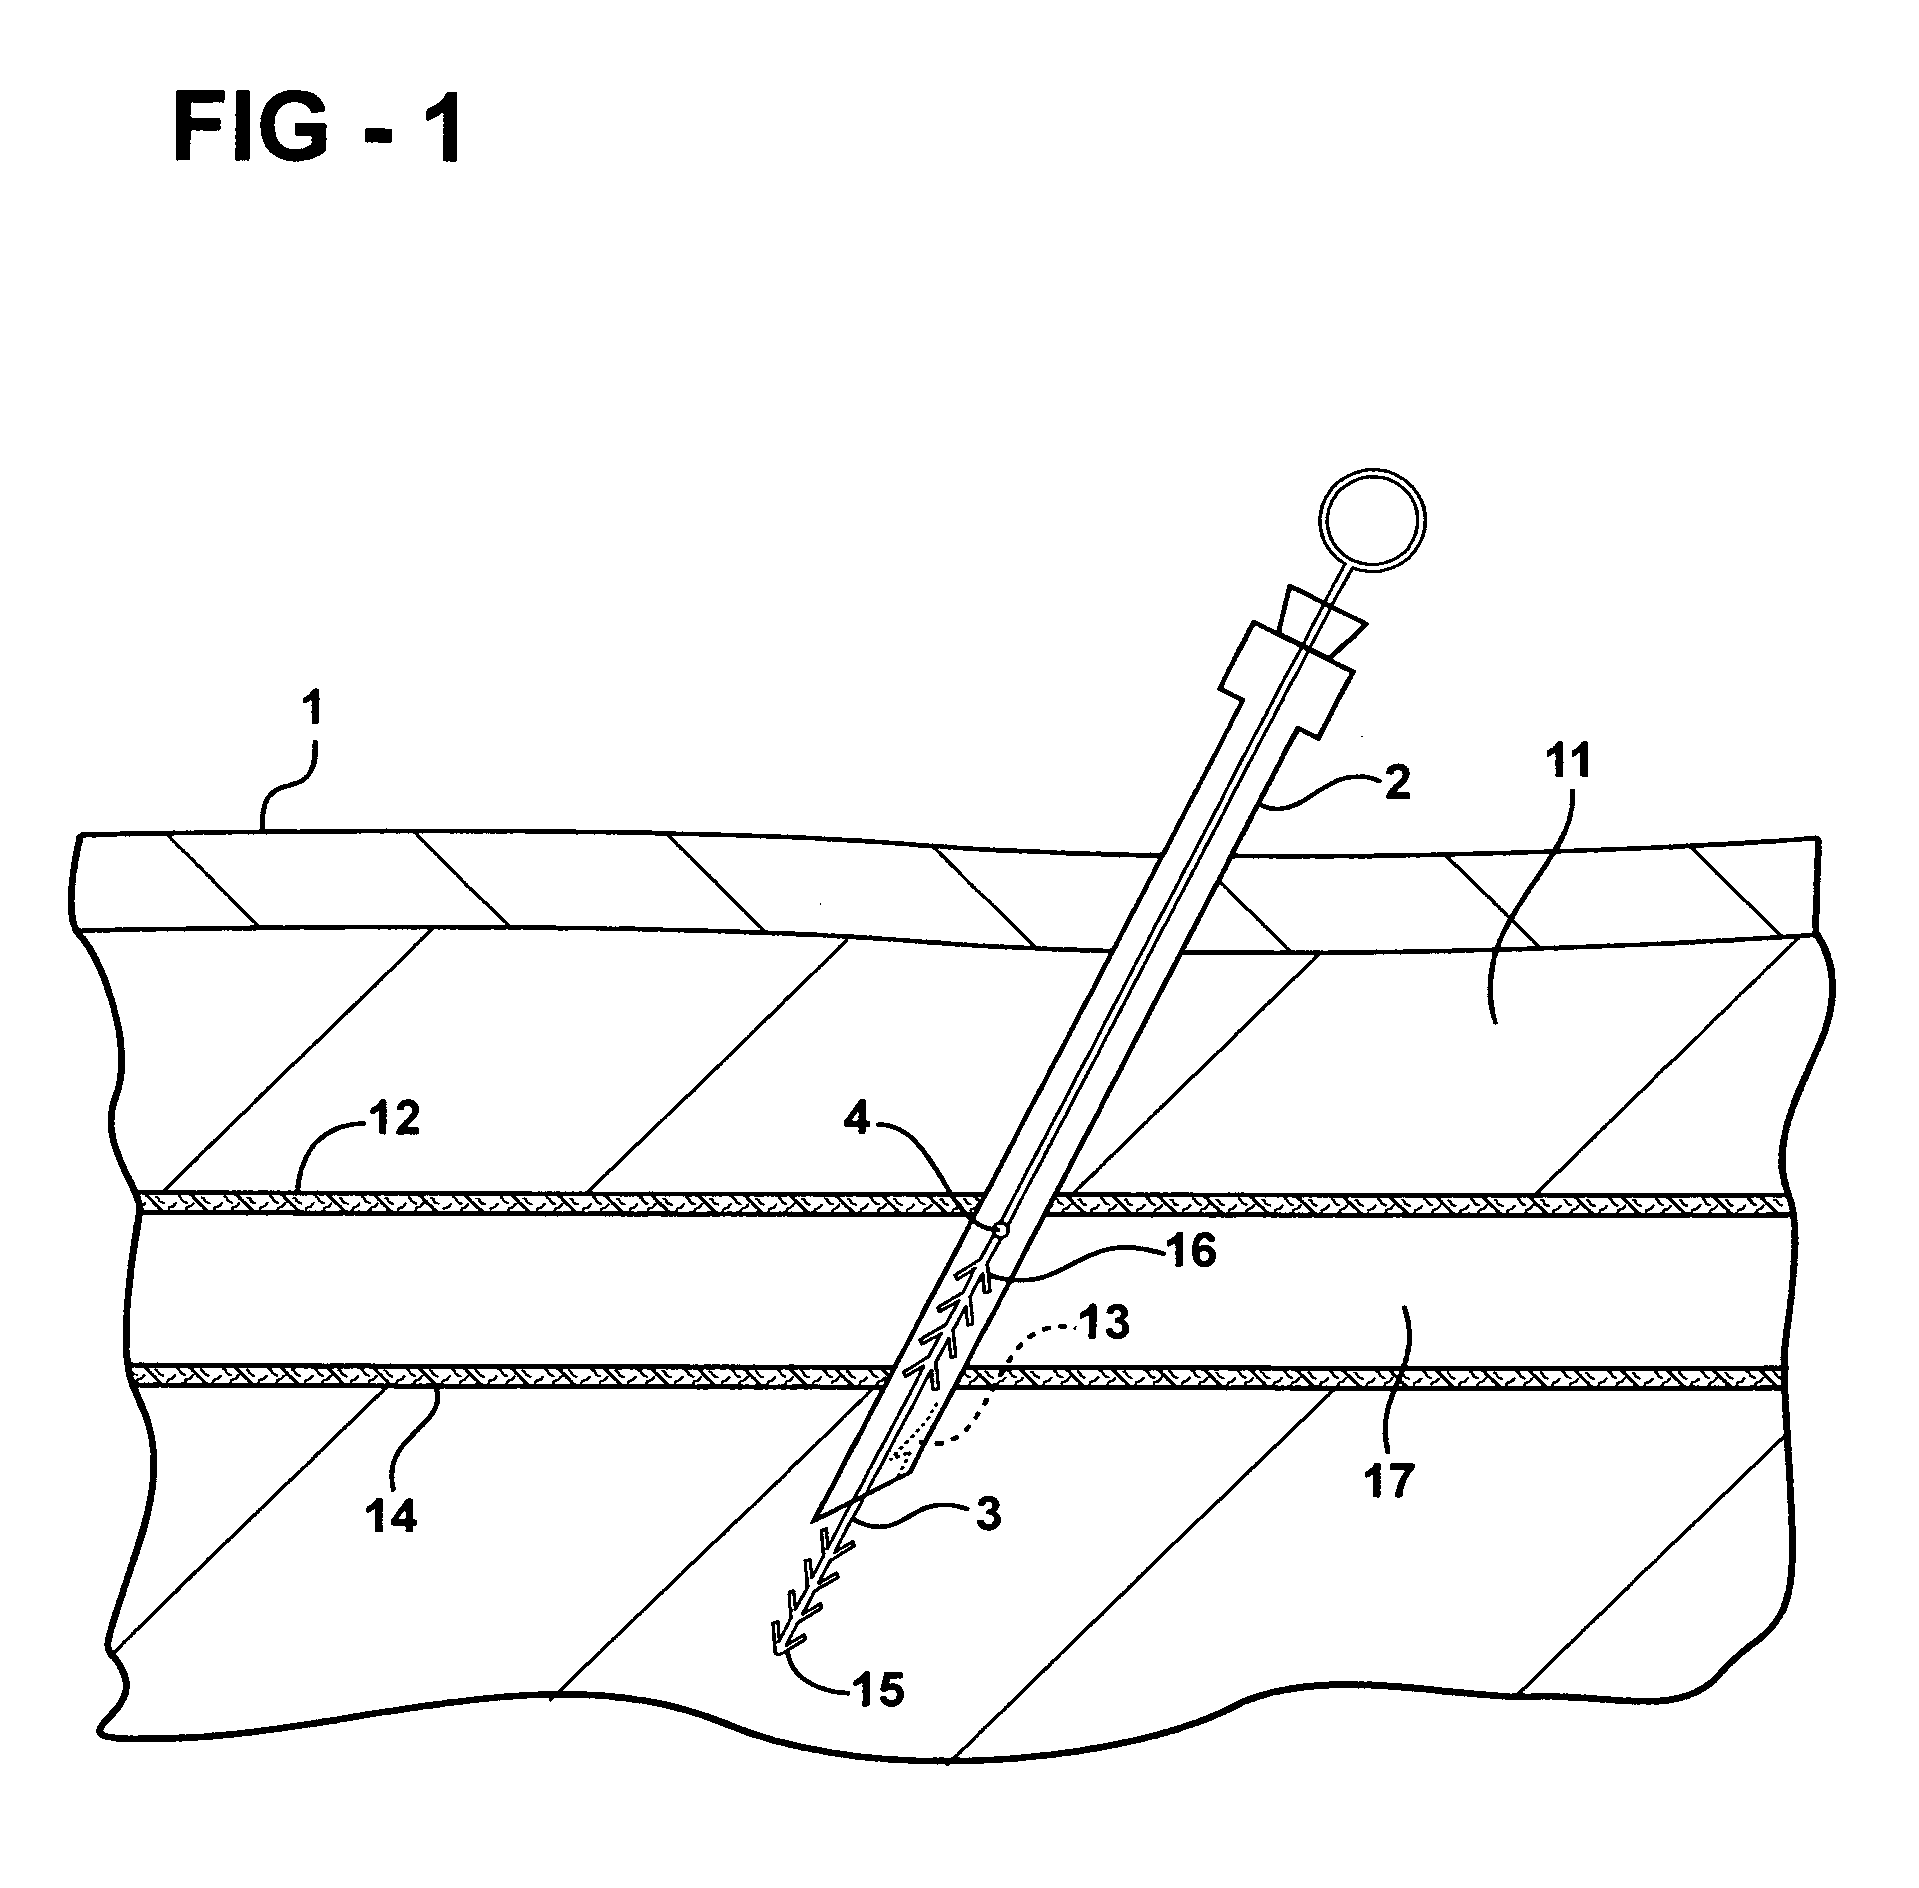 Methods and apparatus for utilization of barbed sutures in human tissue including a method for eliminating or improving blood flow in veins